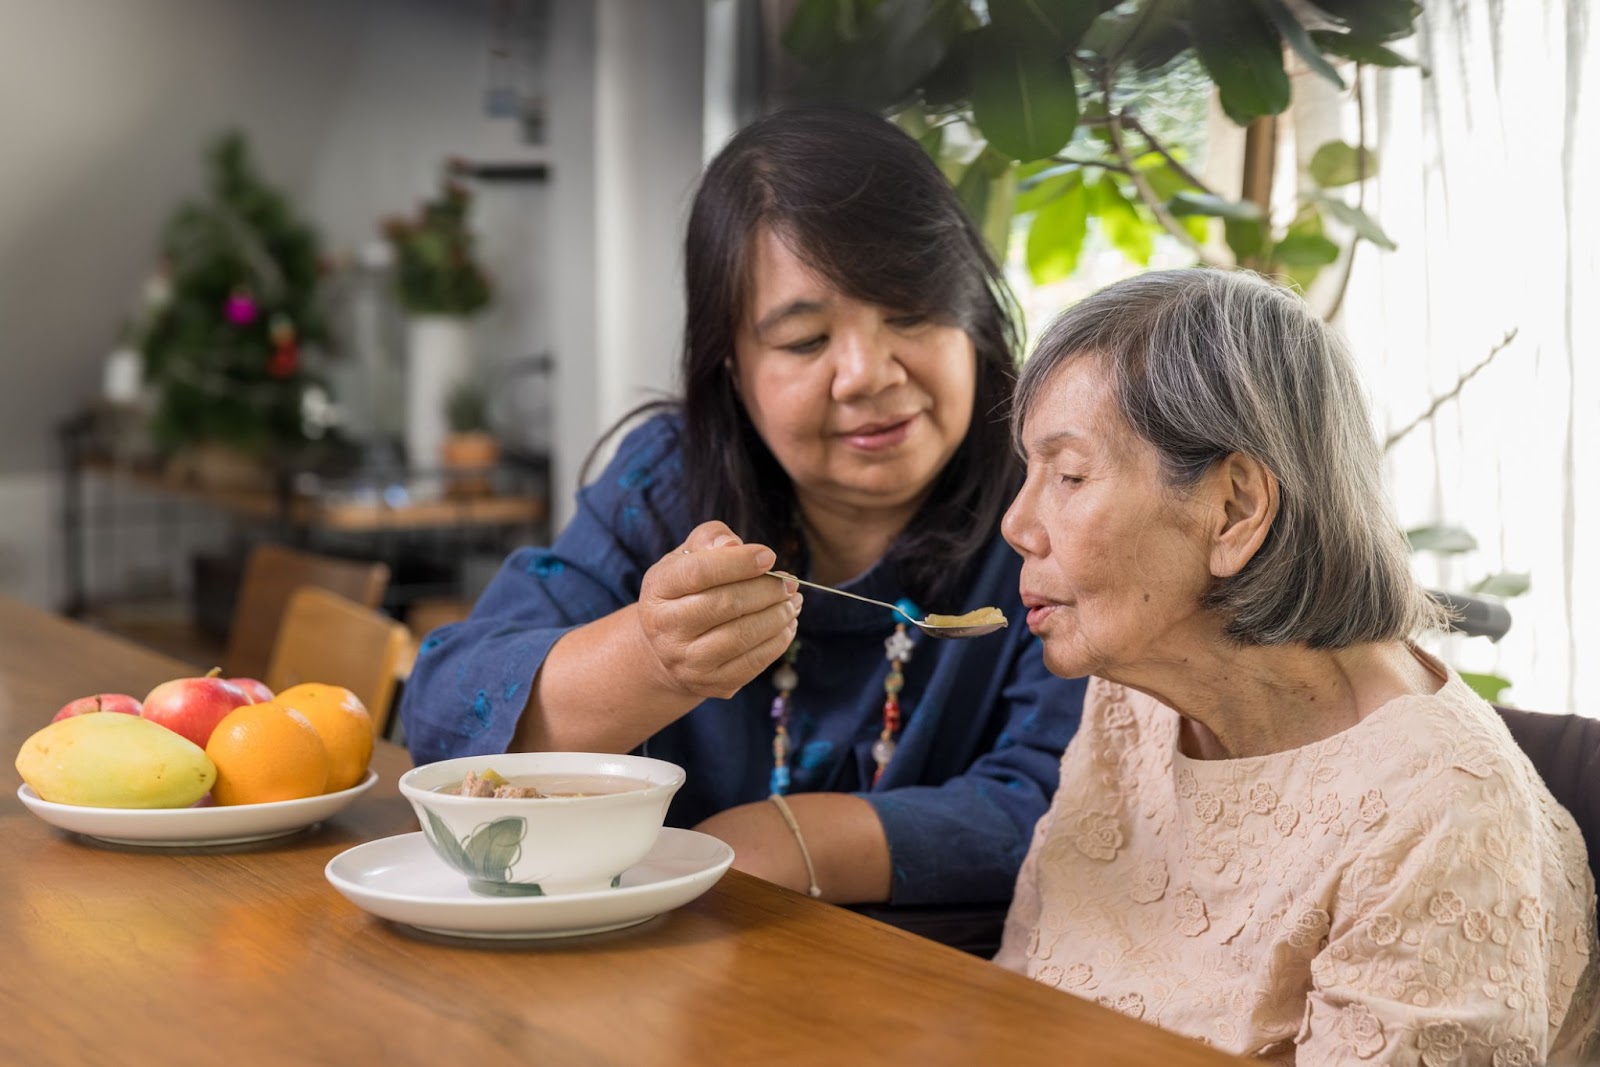 5 Facts About Lewy Body Dementia for Family Caregivers